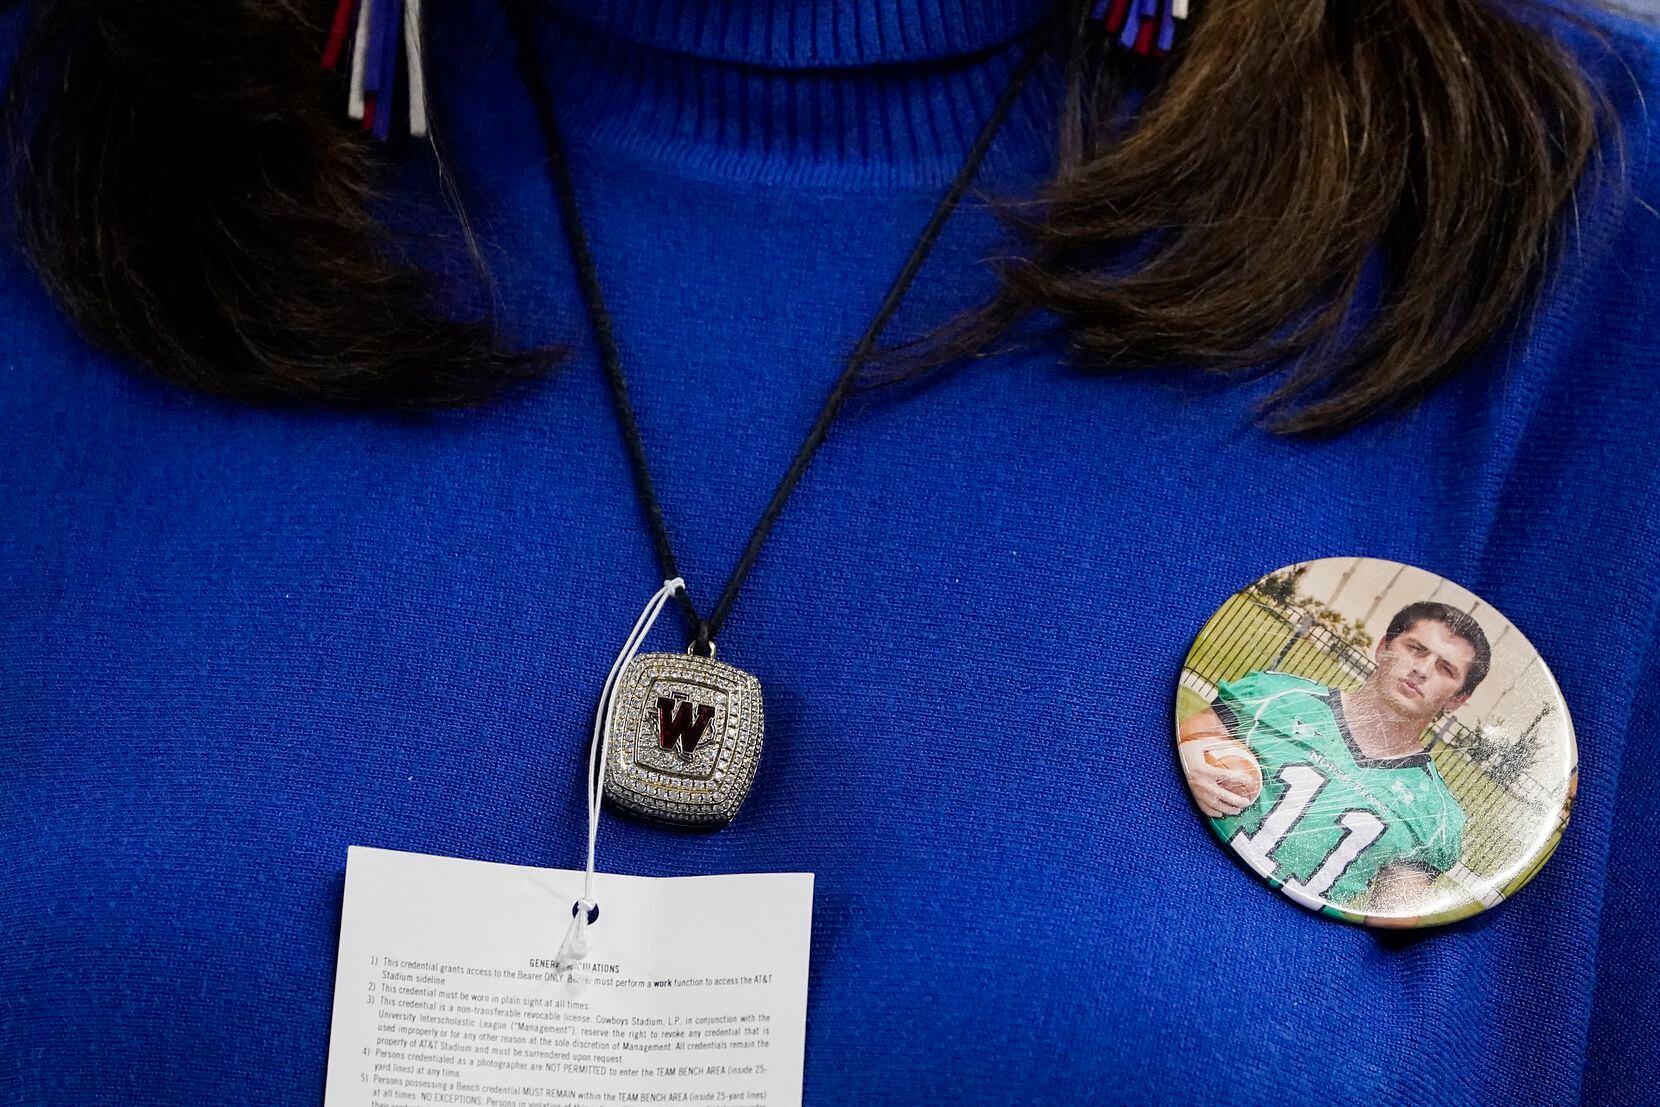 Elizabeth Dodge wears a Westlake pendant and the team colors colors, but also sports a button of her son when he played at Southlake as her husband, Austin Westlake head coach Todd Dodge faces off against her son, Southlake Carroll head coach Riley Dodge, during the first quarter of the Class 6A Division I state football championship game at AT&T Stadium on Saturday, Jan. 16, 2021, in Arlington, Texas.